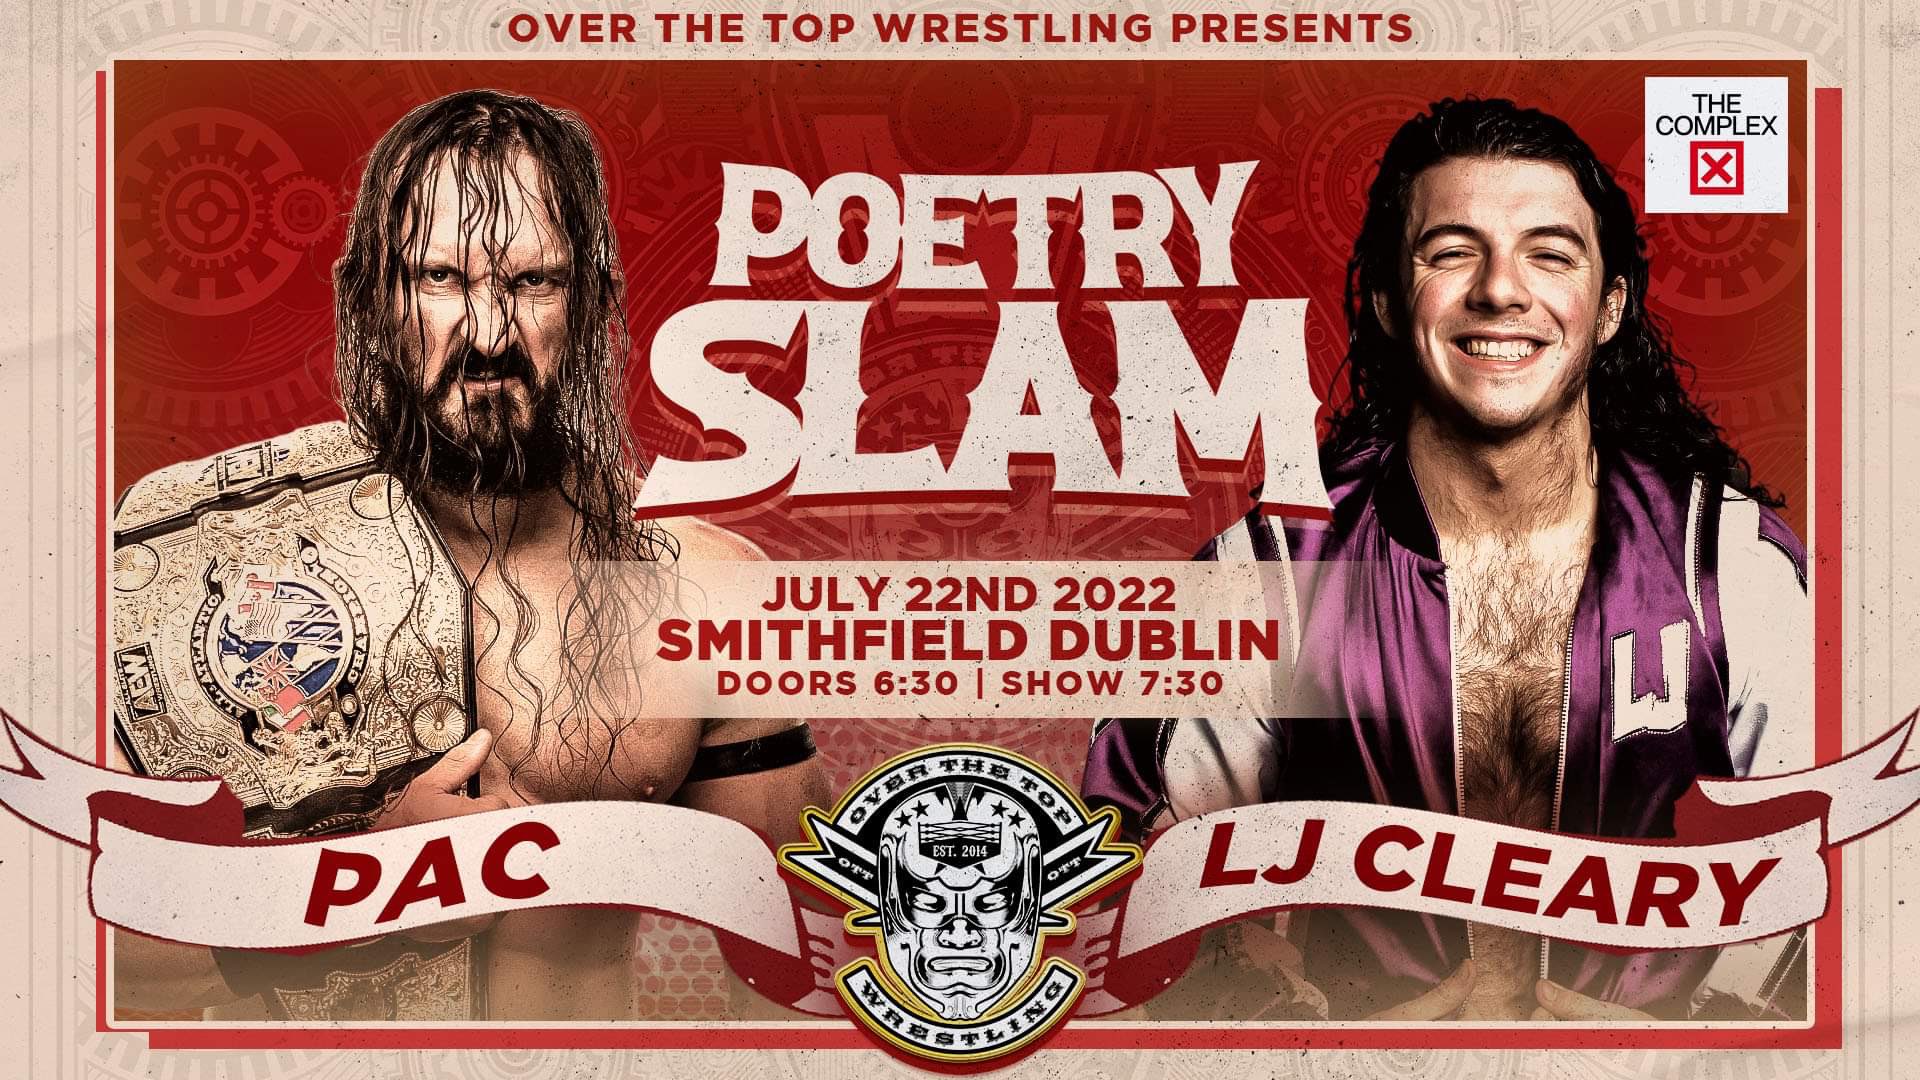 OTT Announces That PAC Will Defend The AEW All Atlantic Title At Their Poetry Slam Event